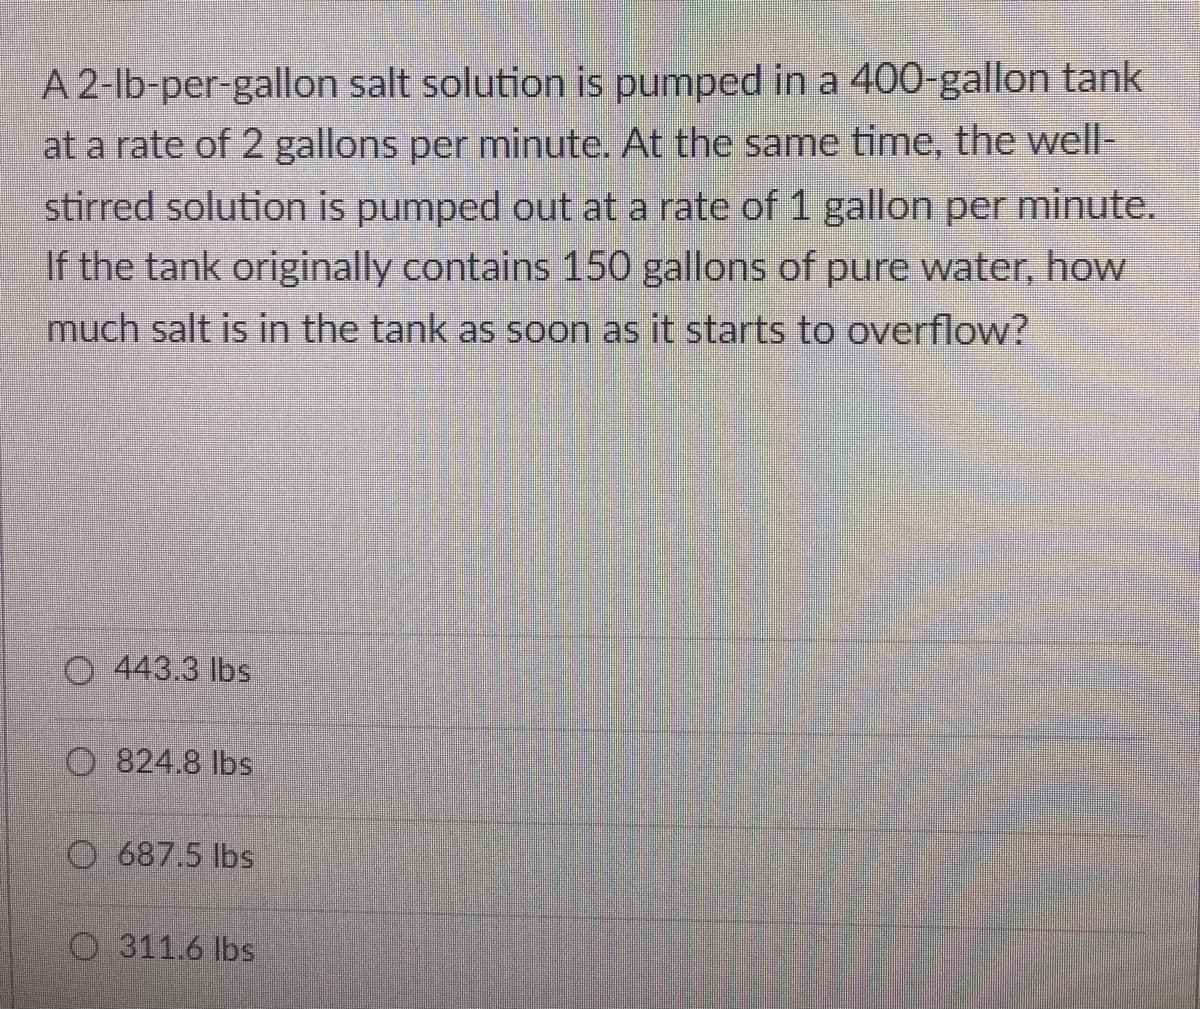 A 2-lb-per-gallon salt solution is pumped in a 400-gallon tank
at a rate of 2 gallons per minute. At the same time, the well-
stirred solution is pumped out at a rate of 1 gallon per minute.
If the tank originally contains 150 gallons of pure water, how
much salt is in the tank as soon as it starts to overflow?
O 443.3 lbs
O 824.8 lbs
O 687.5 lbs
O 311.6 lbs
